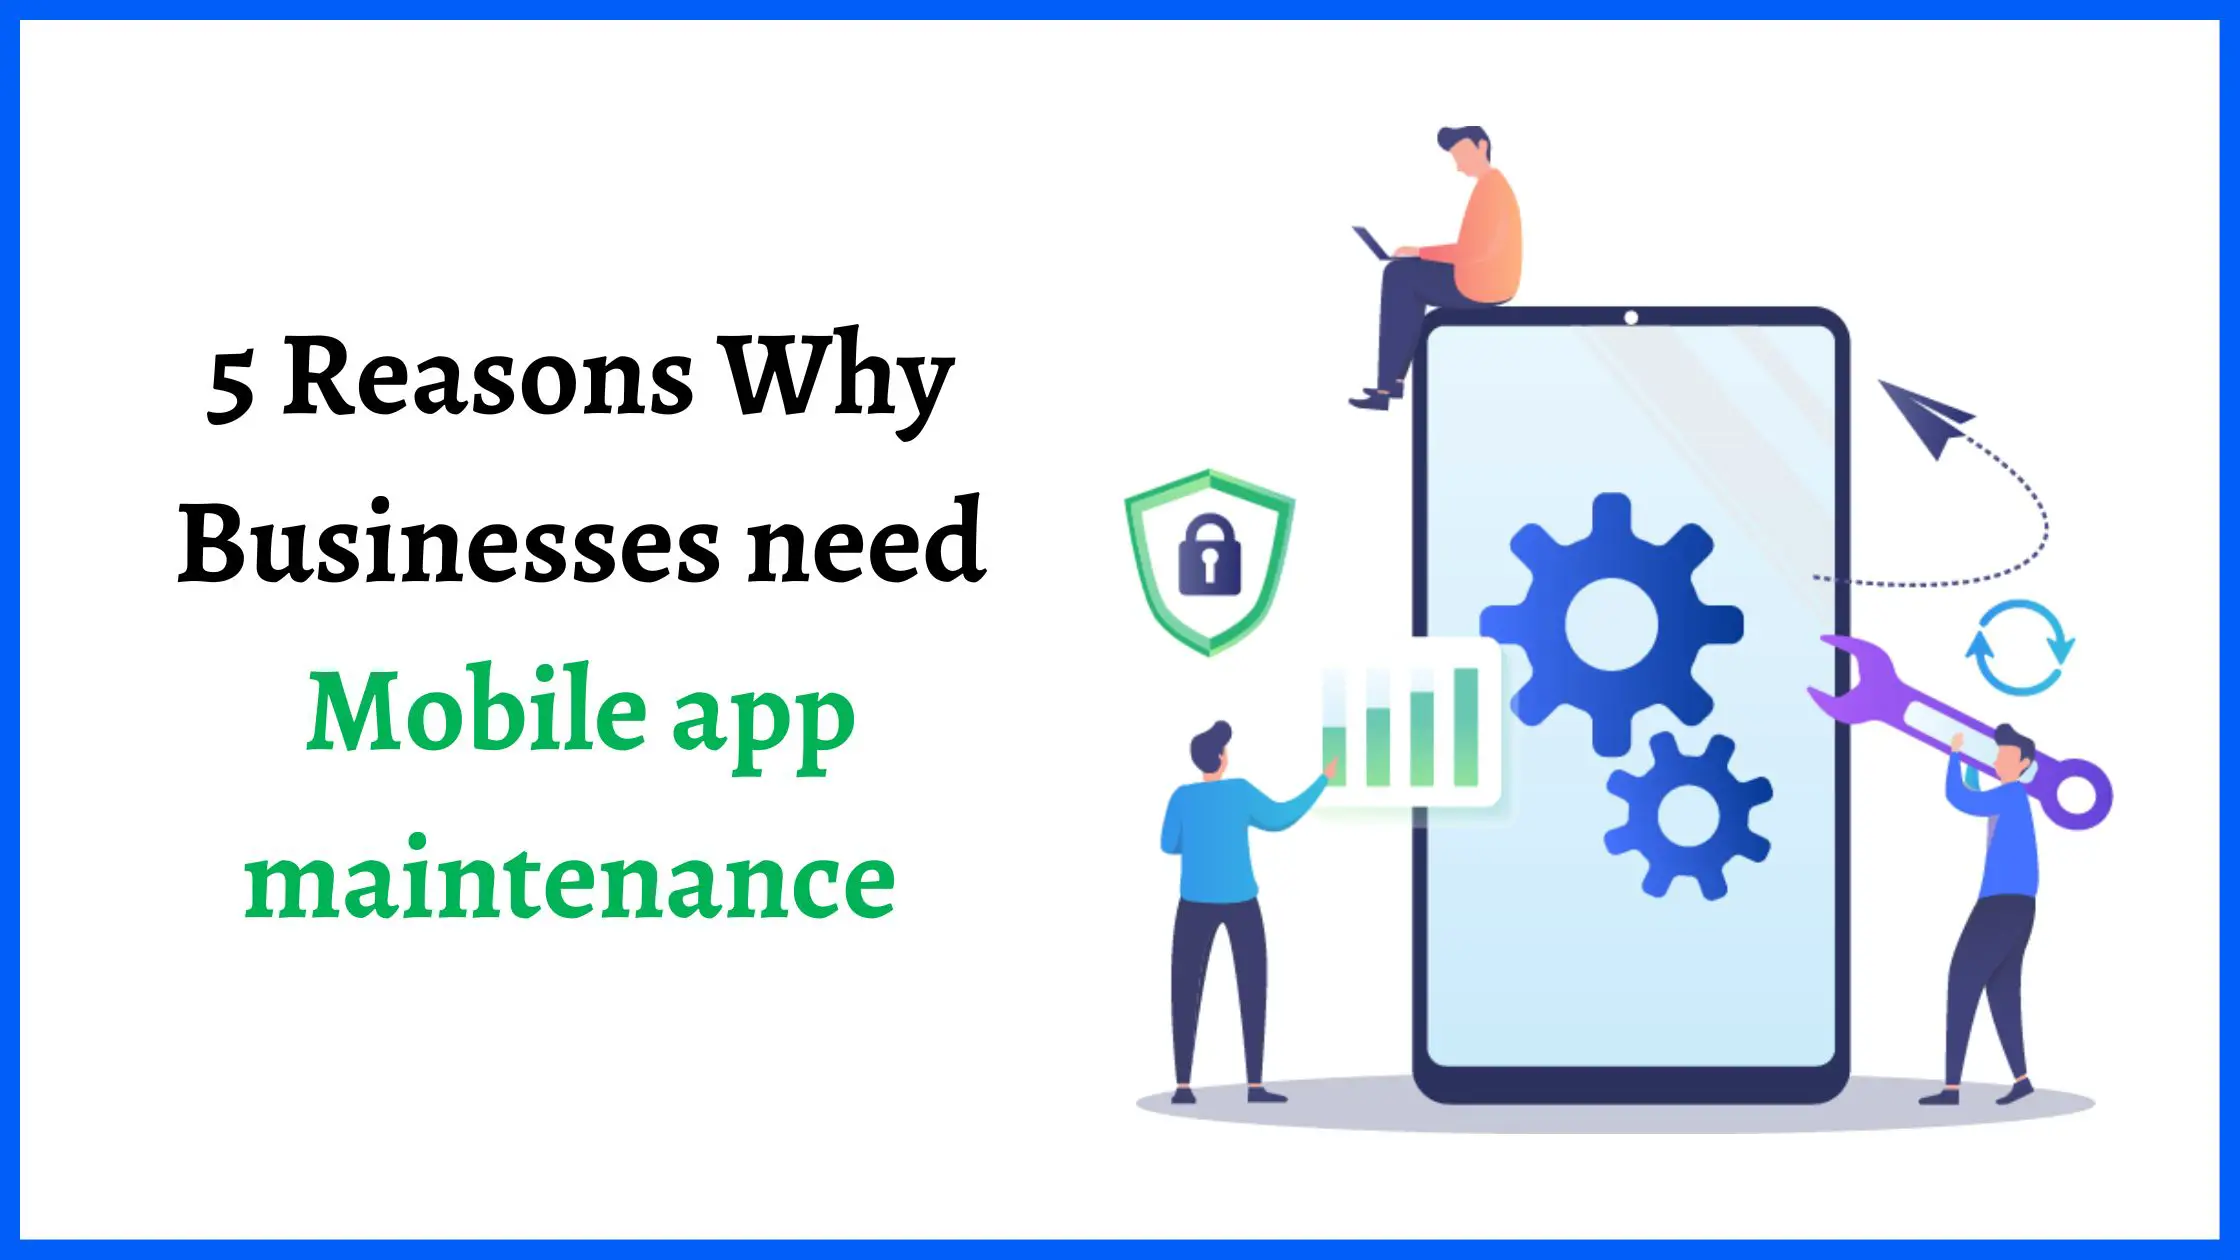 5 Reasons Why Businesses need Mobile app maintenance-f9a80347